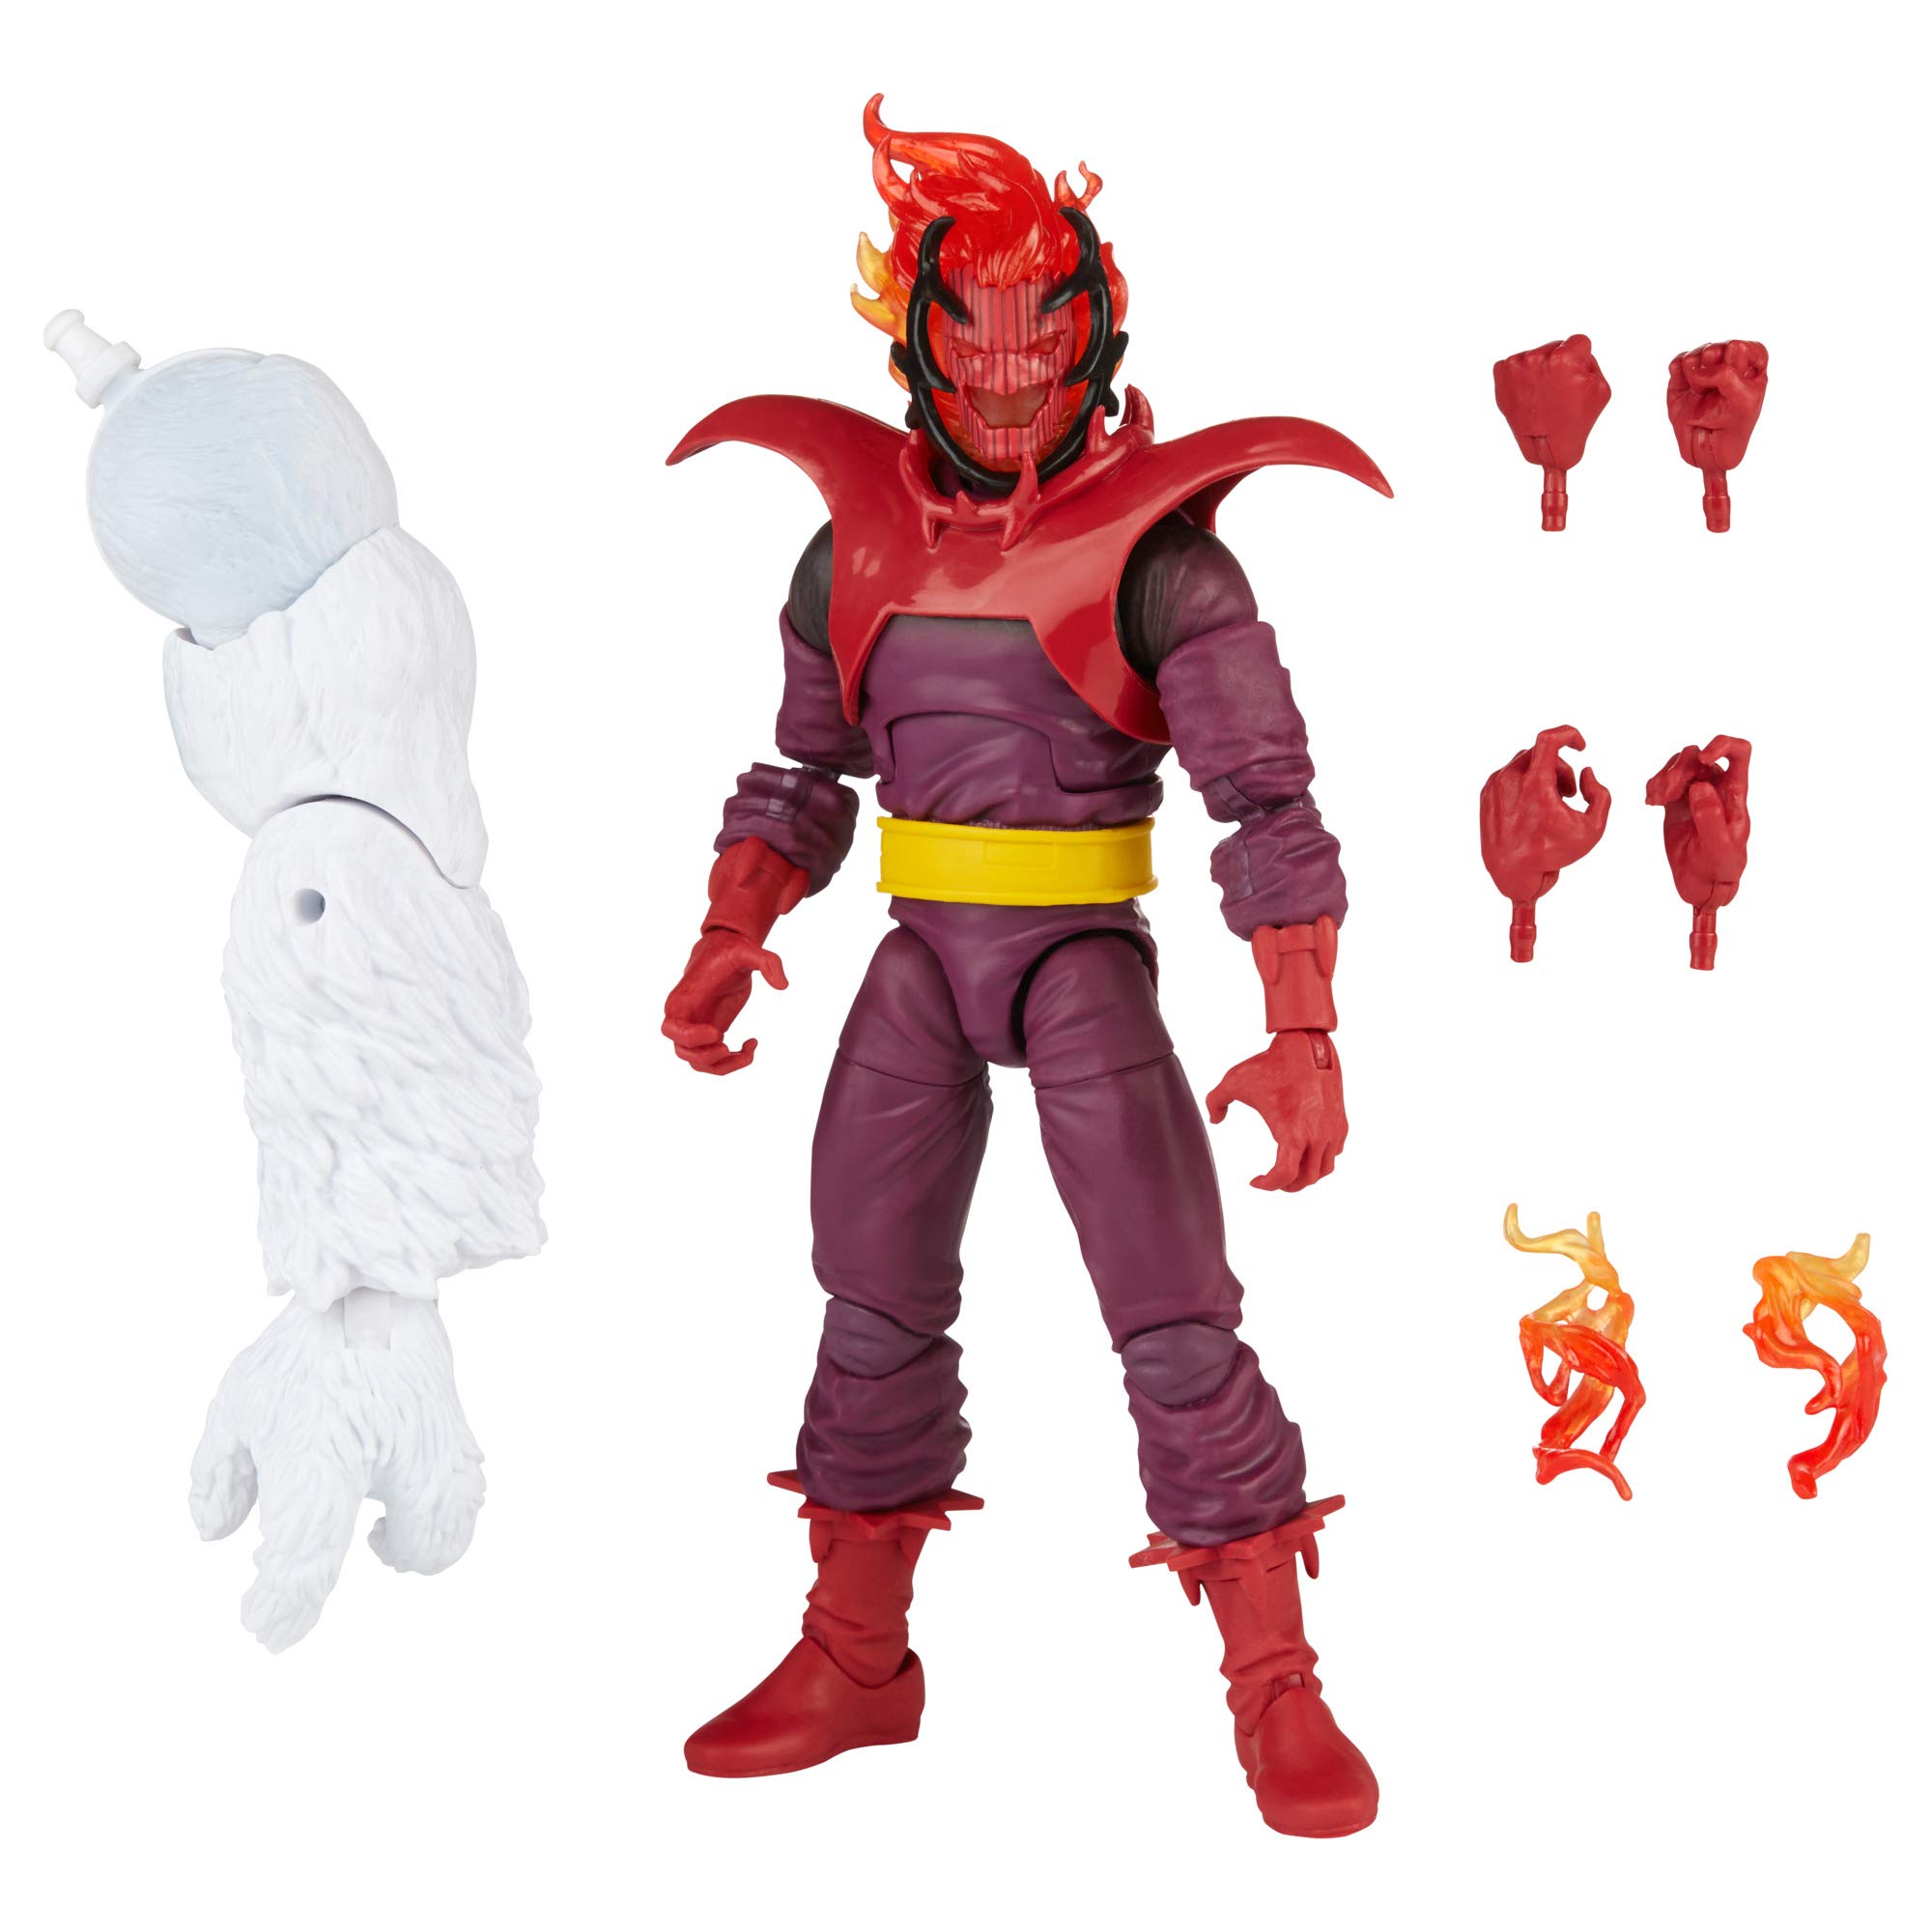 Marvel Legends Series 6-inch Collectible Action Dormammu Figure and 2 Accessories